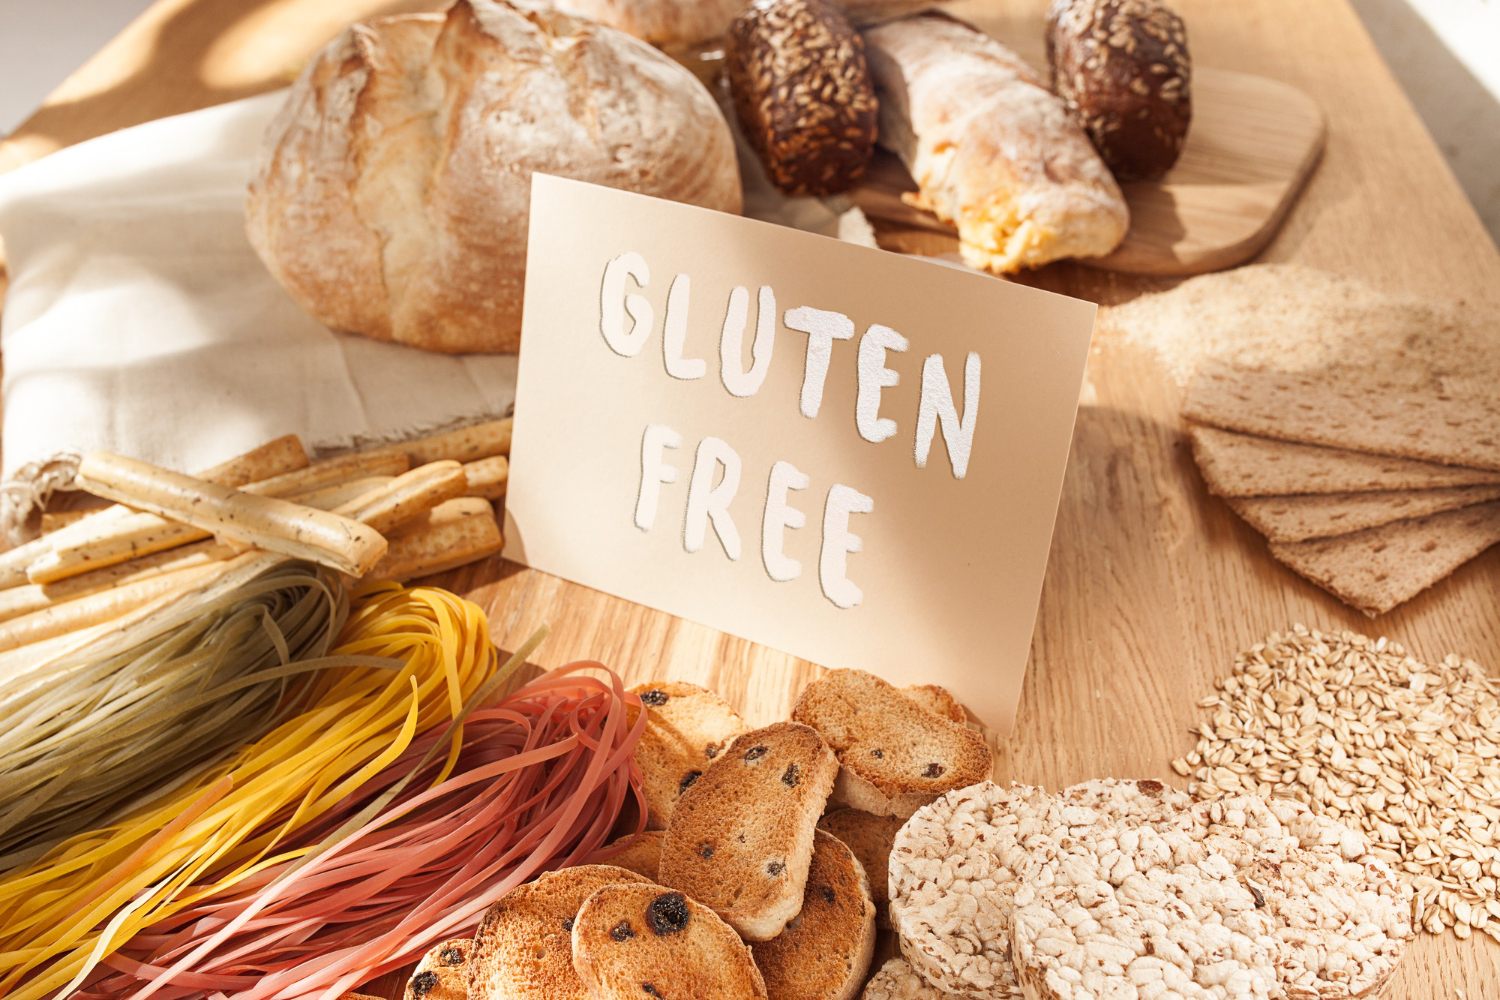 How to Manage a Gluten Intolerance or Allergy